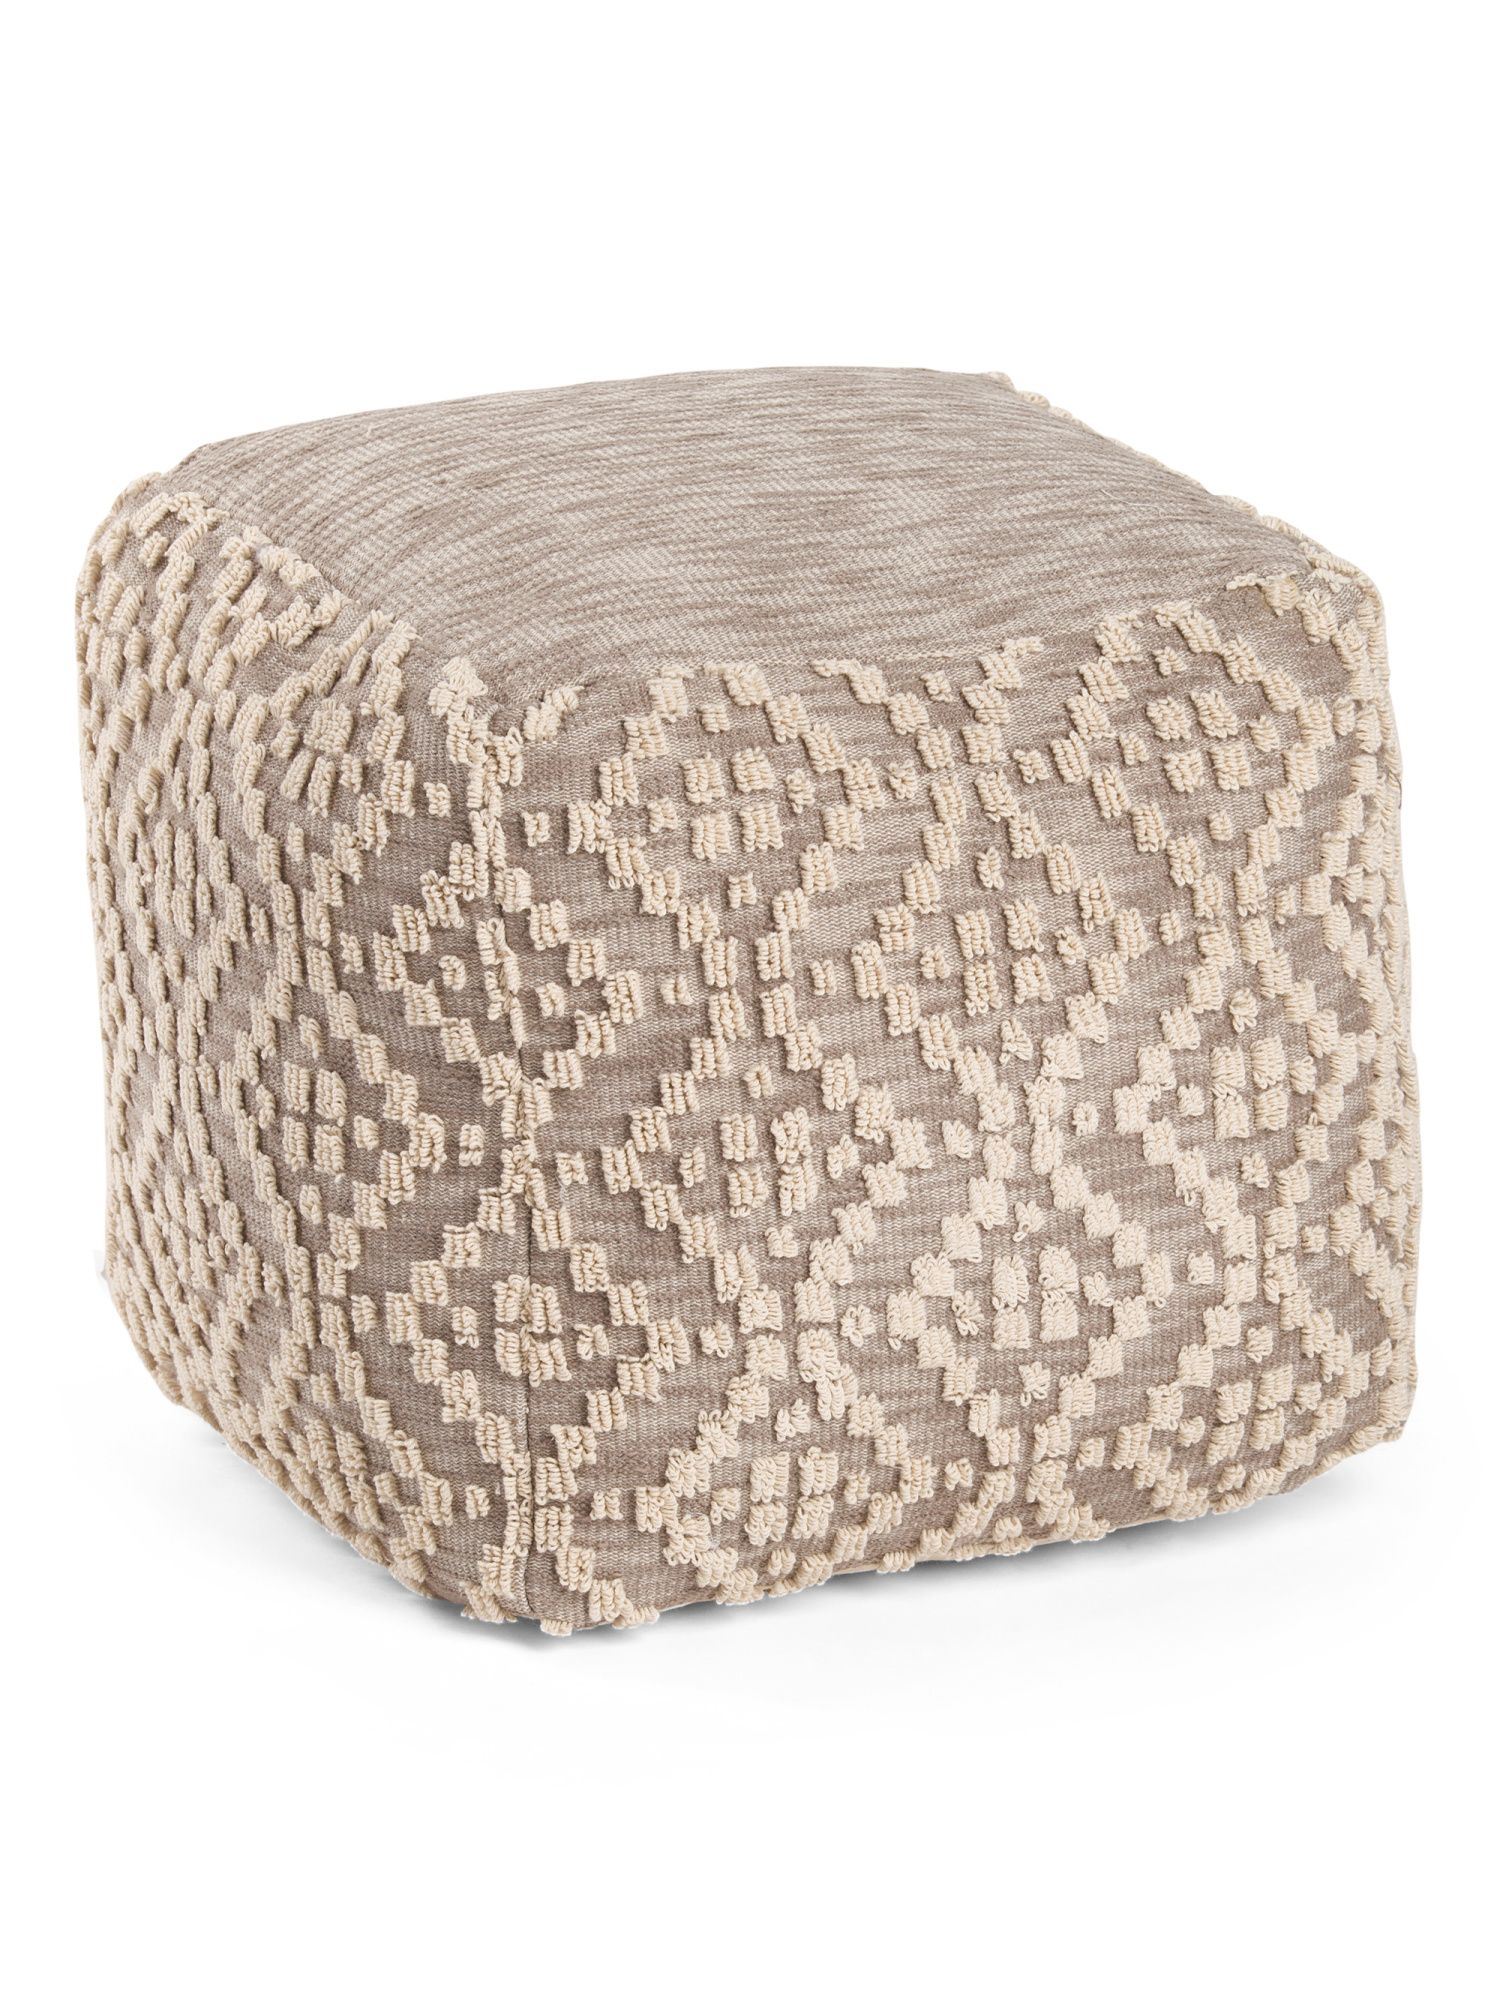 Made In India 18x18 Knit Pouf | TJ Maxx